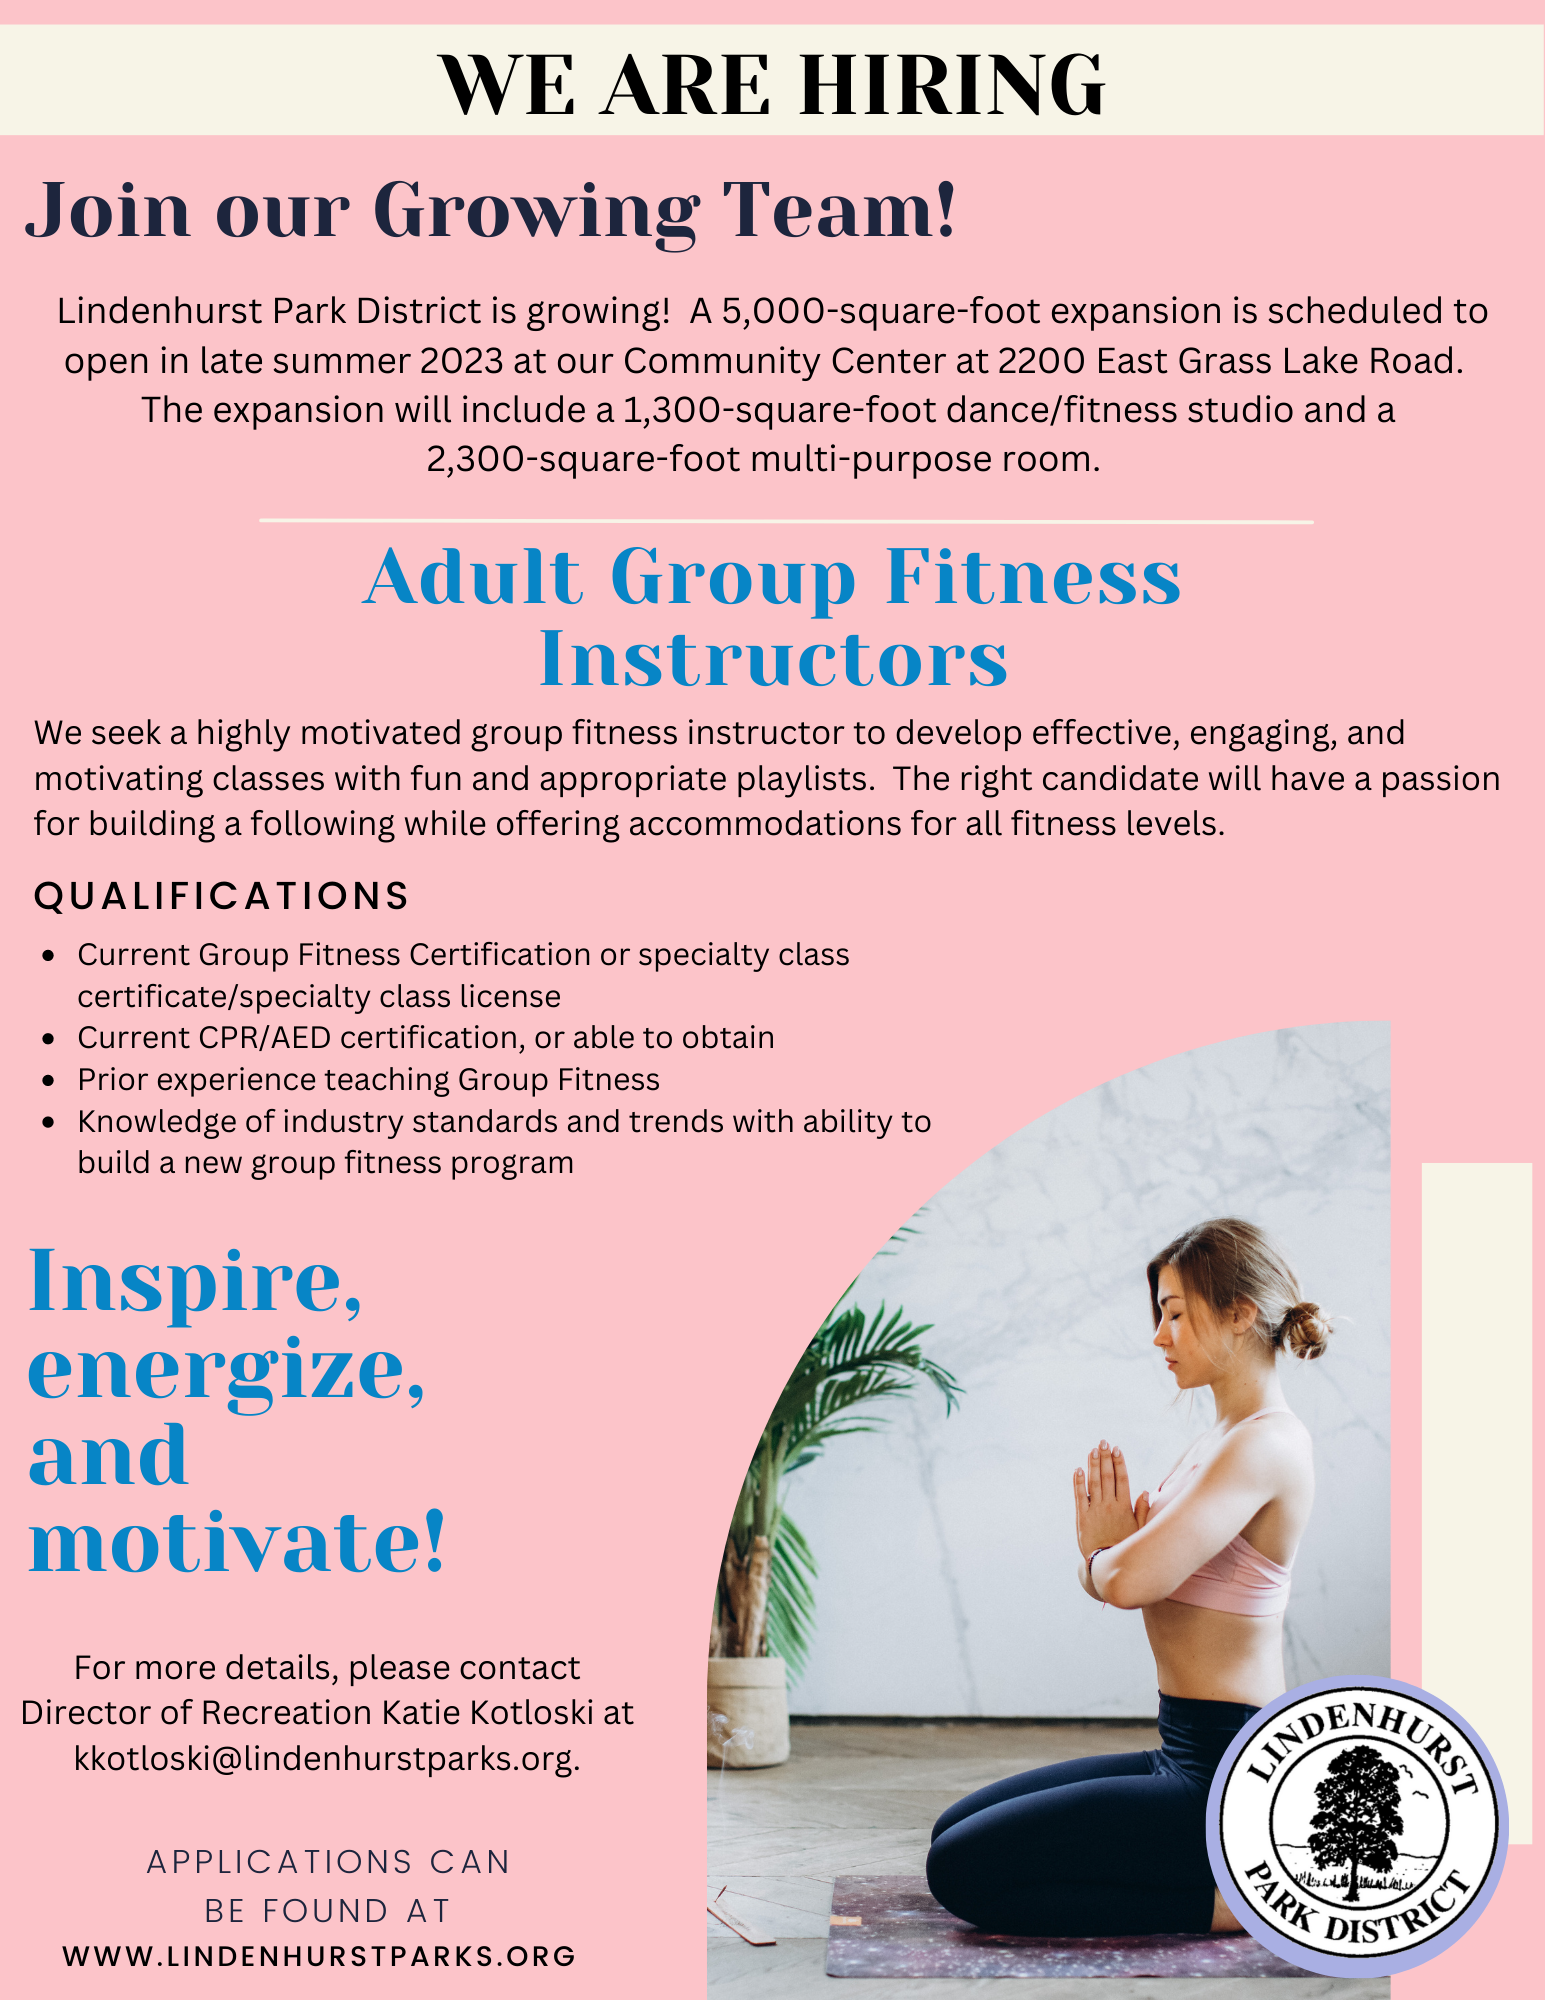 
An employment advertisement from Lindenhurst Park District announcing they are hiring Adult Group Fitness Instructors for their expanding team. The district is adding a 5,000-square-foot expansion including fitness studios and multipurpose rooms. The flyer lists qualifications like fitness certification and CPR/AED certification, seeks candidates passionate about leading motivating classes, and offers contact information for the Director of Recreation for more details. Applications can be found on their website. A peaceful image of a person in a yoga pose adds to the theme of fitness and wellness